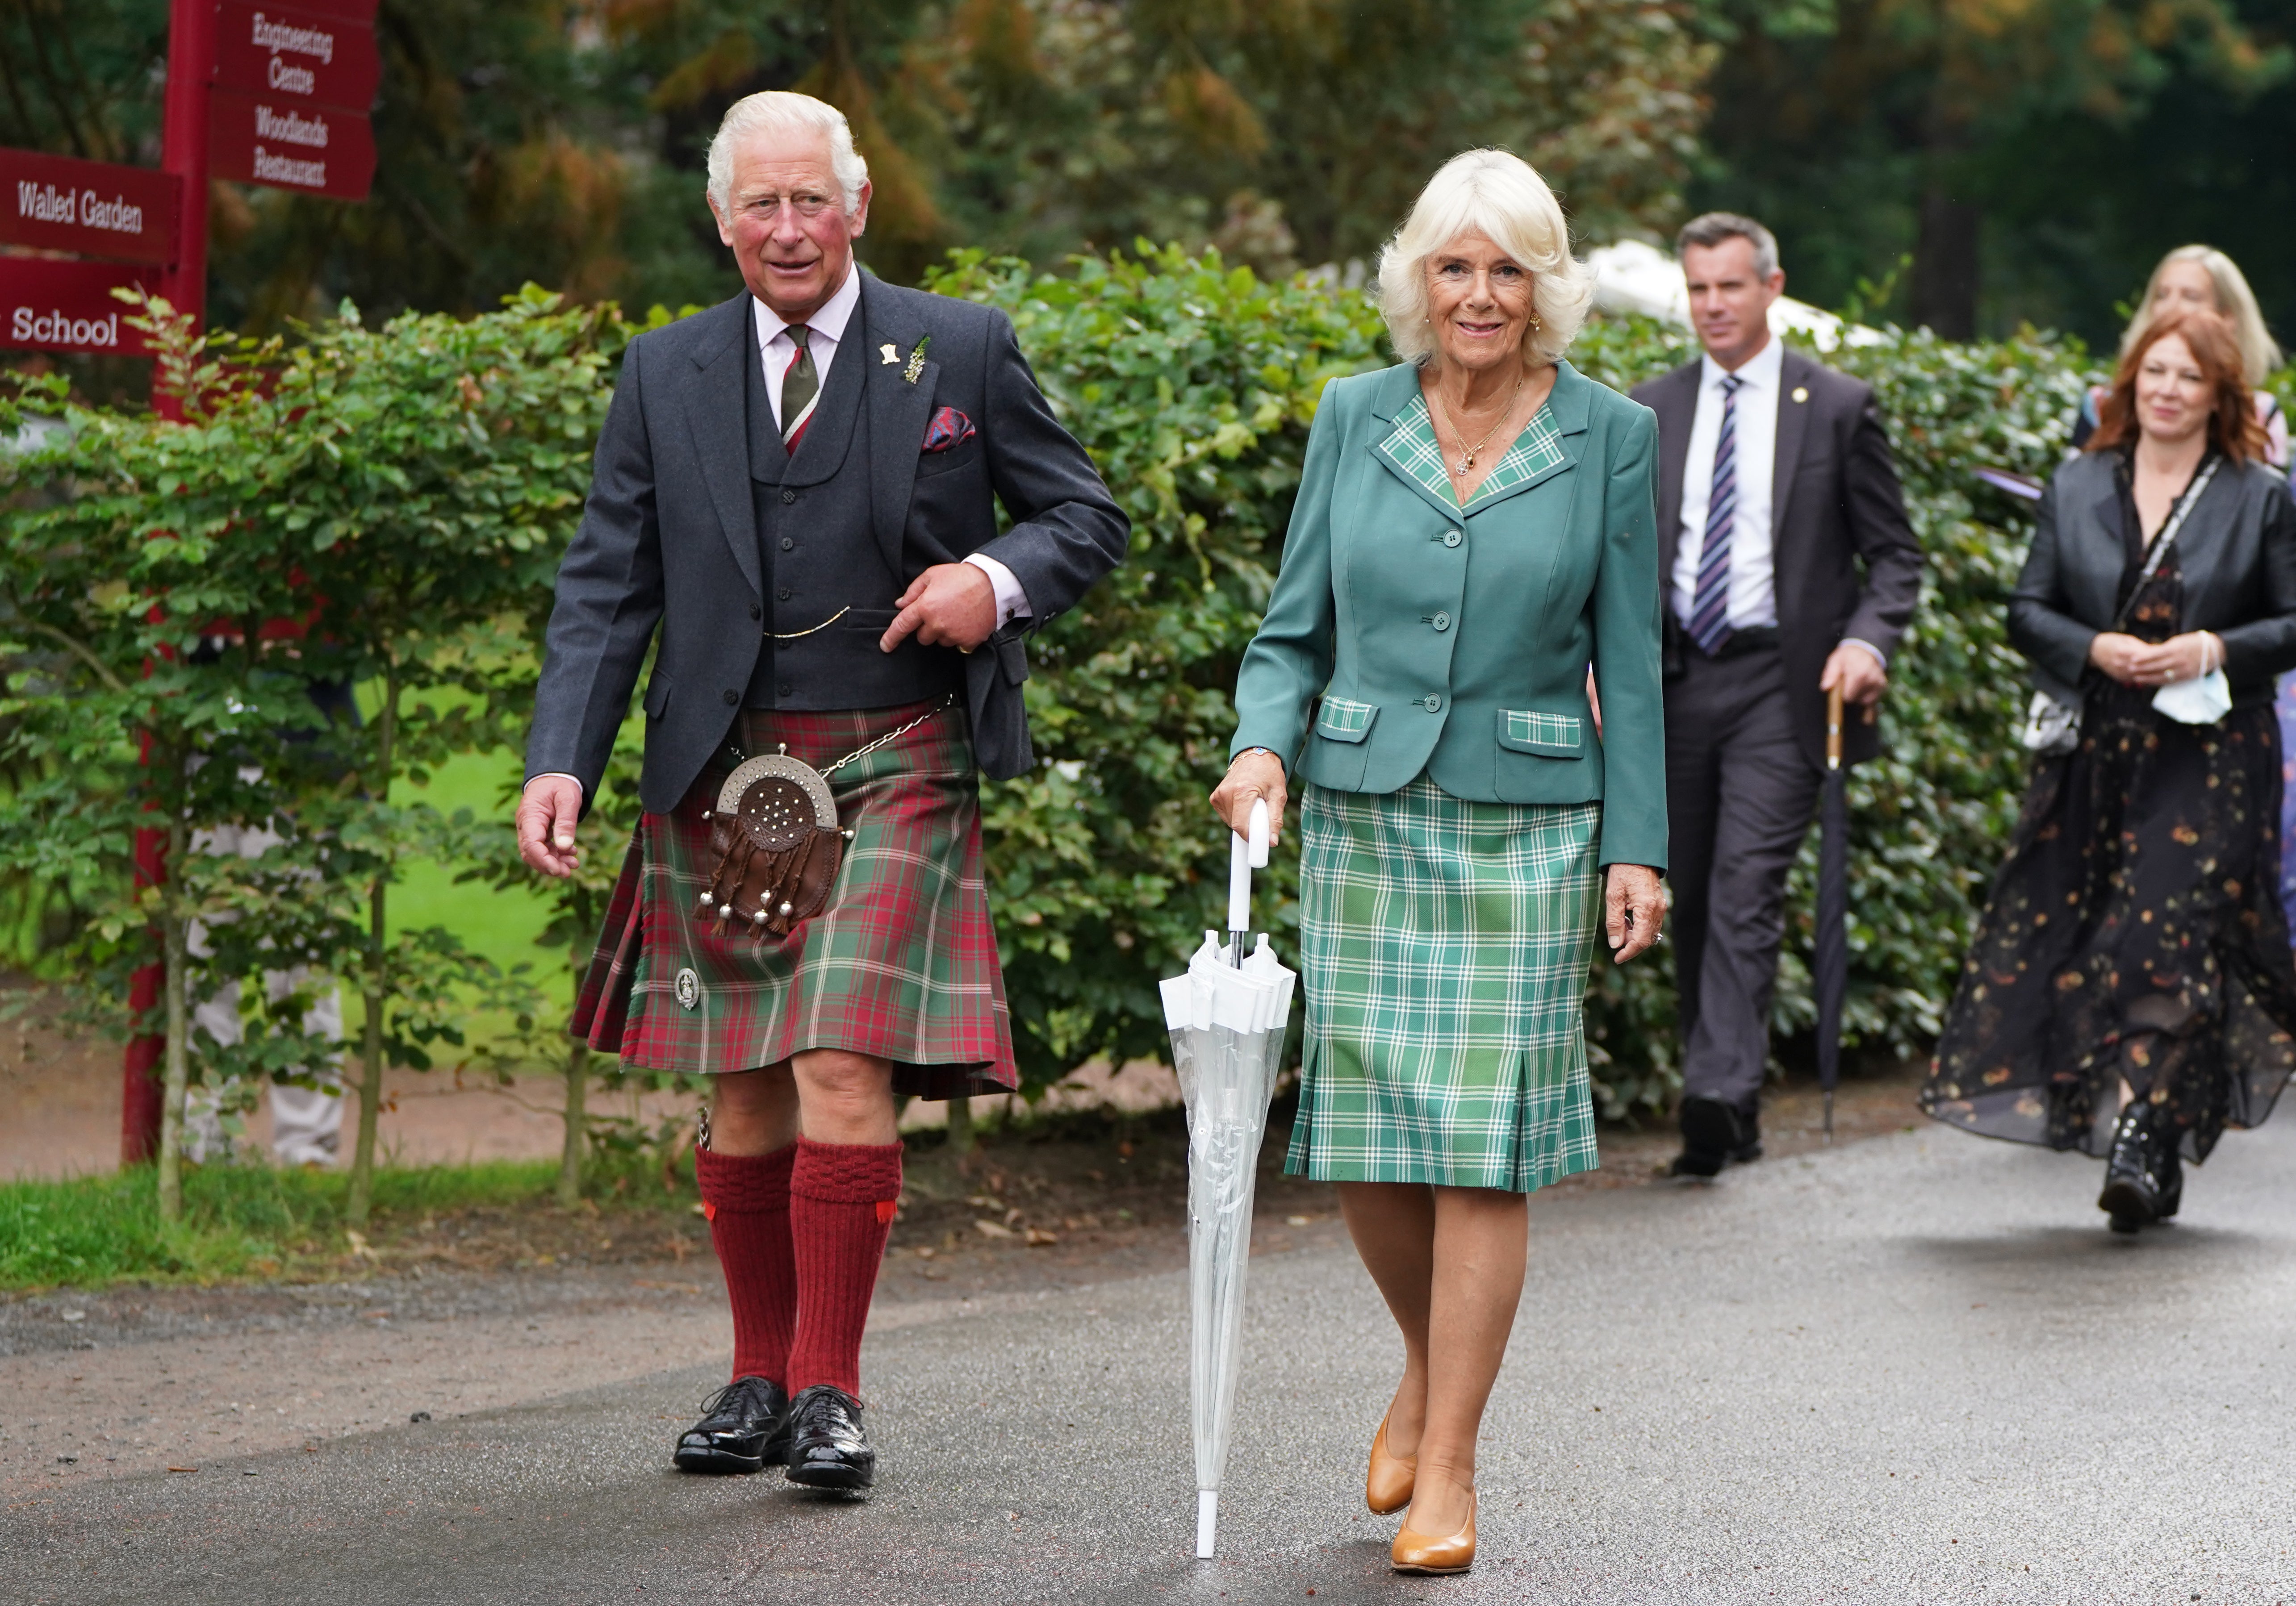 The Prince of Wales and the Duchess of Cornwall in the grounds of Dumfries House, where Michael Fawcett was based (Andrew Milligan/PA)